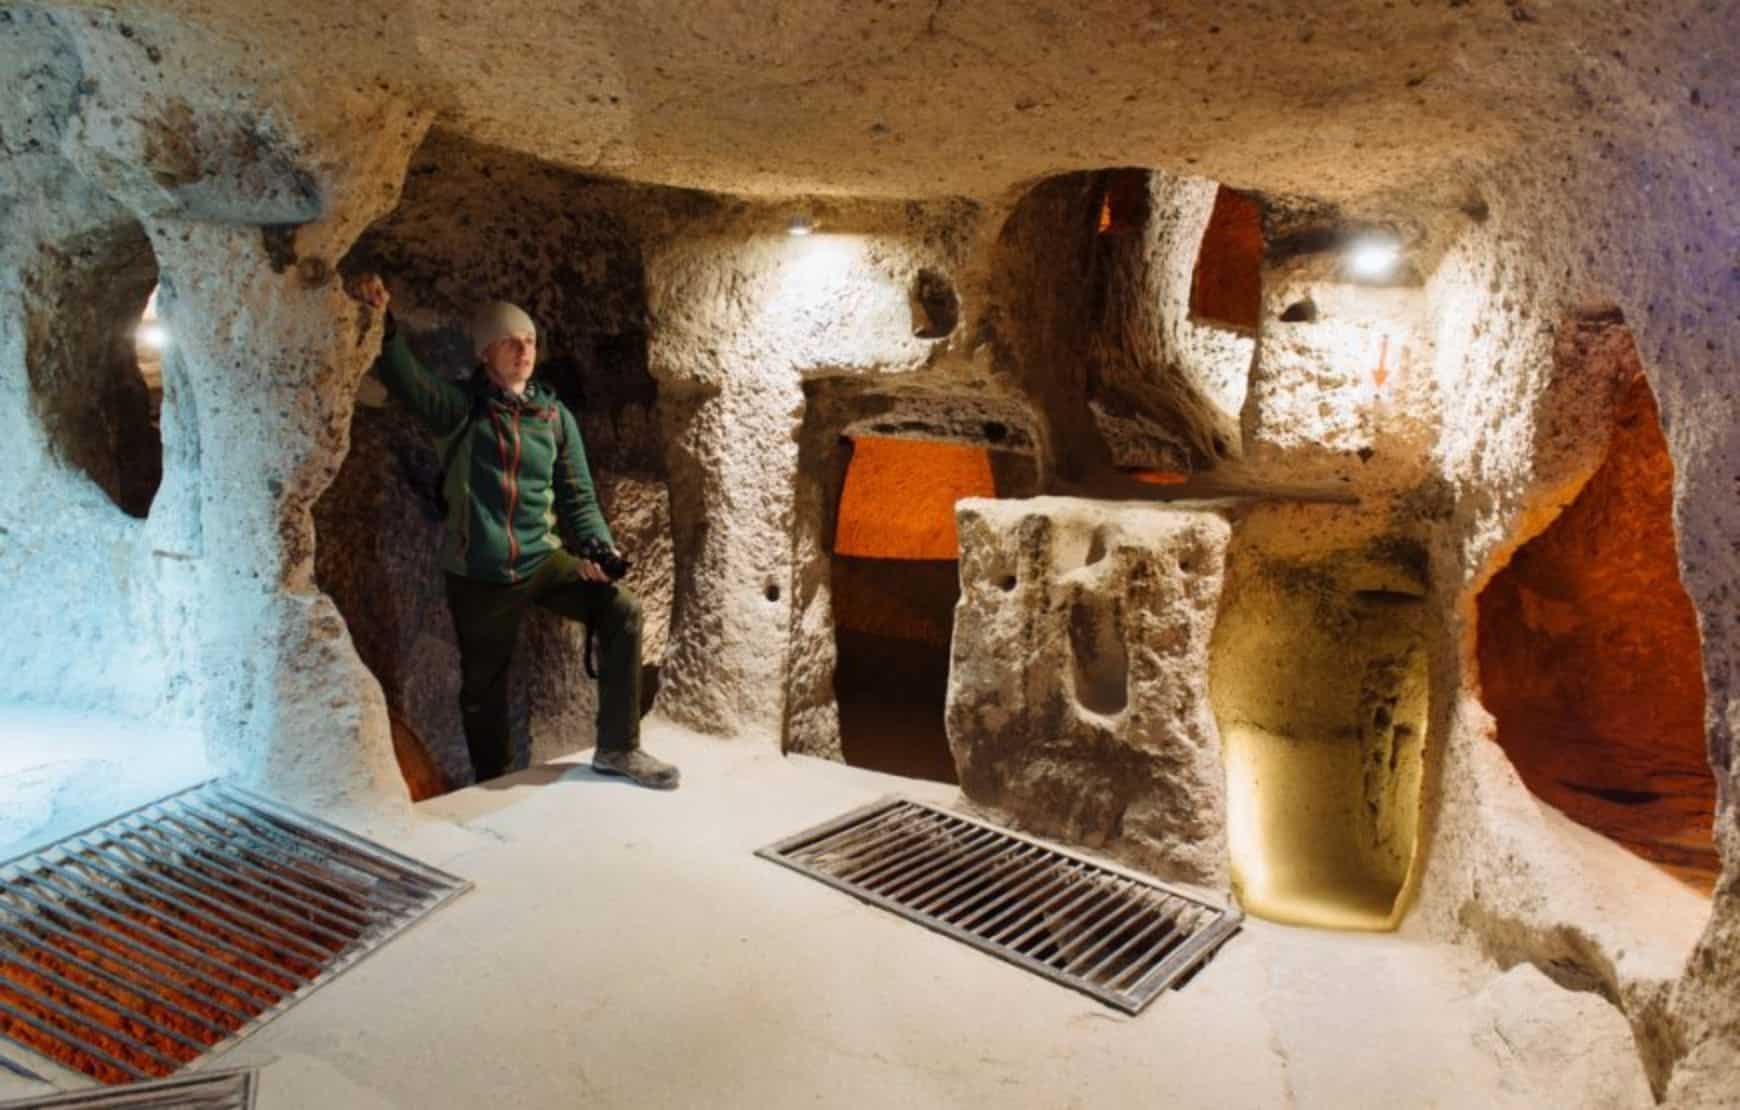 You will have chance to visit Kaymakli Underground City in our Istanbul and Cappadocia Tour